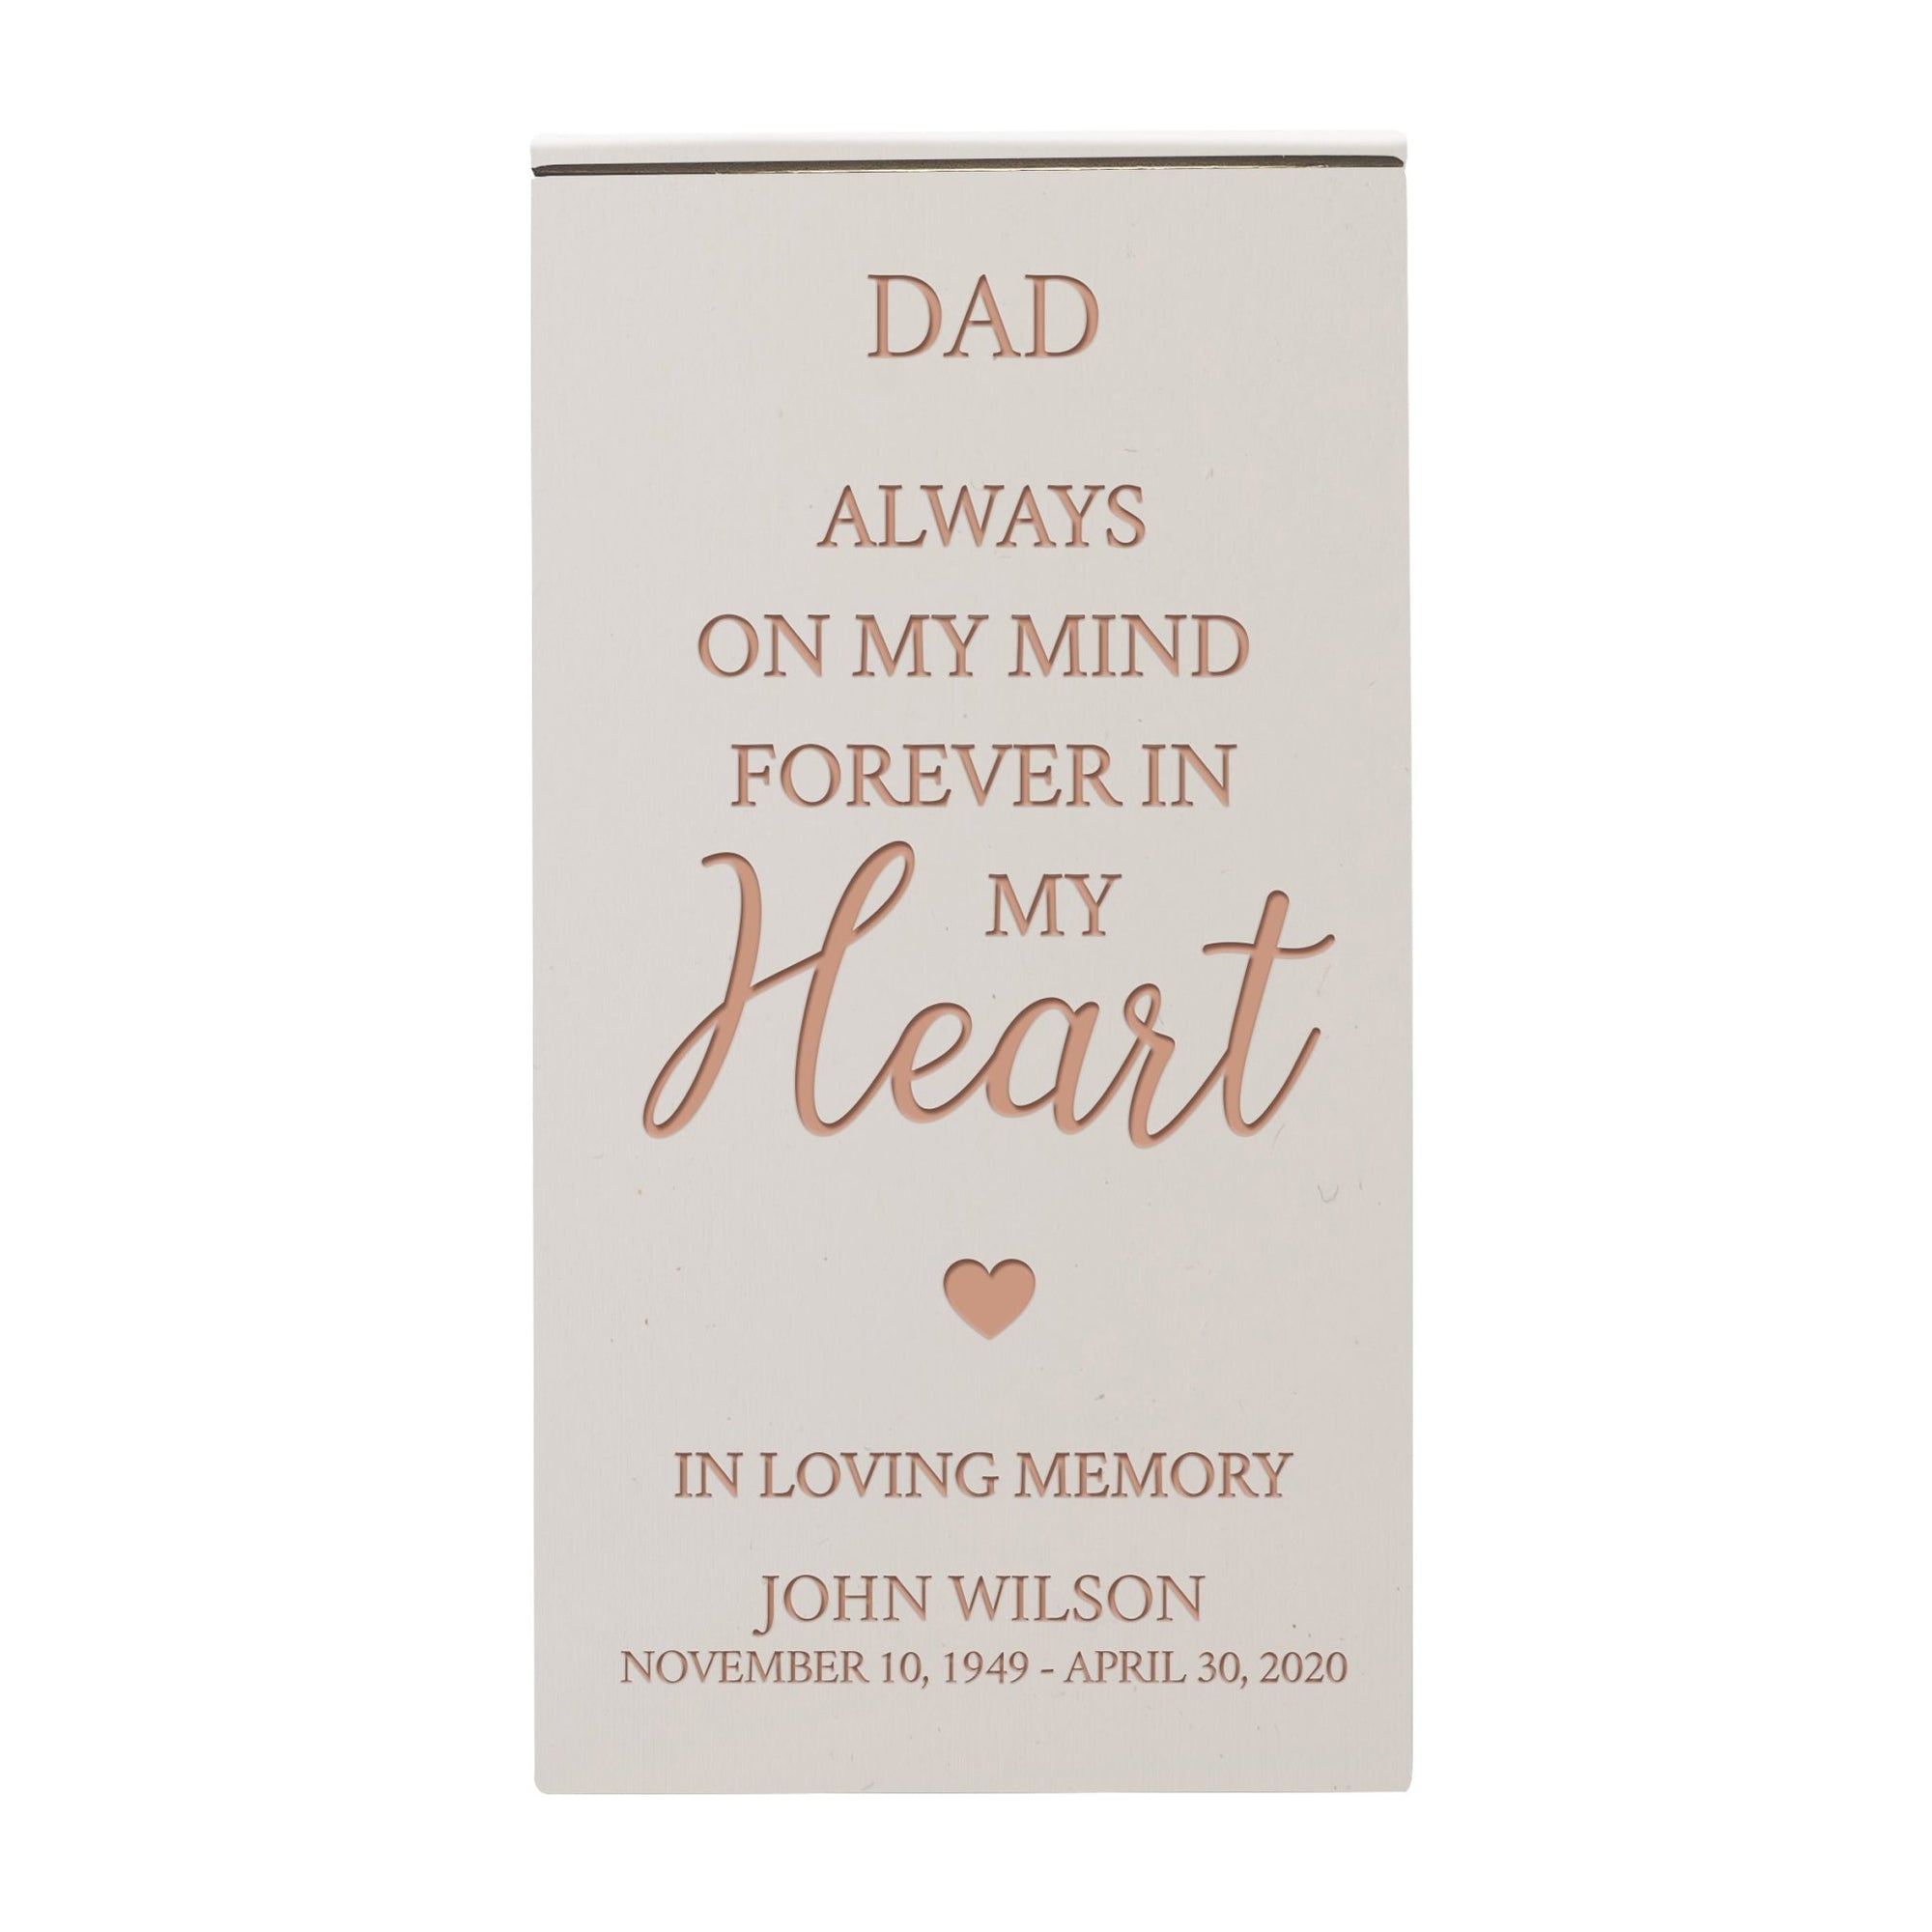 Custom Engraved Memorial Cremation Keepsake Urn Box holds 100 cu in of Ashes in - Dad, Always On My Mind - LifeSong Milestones